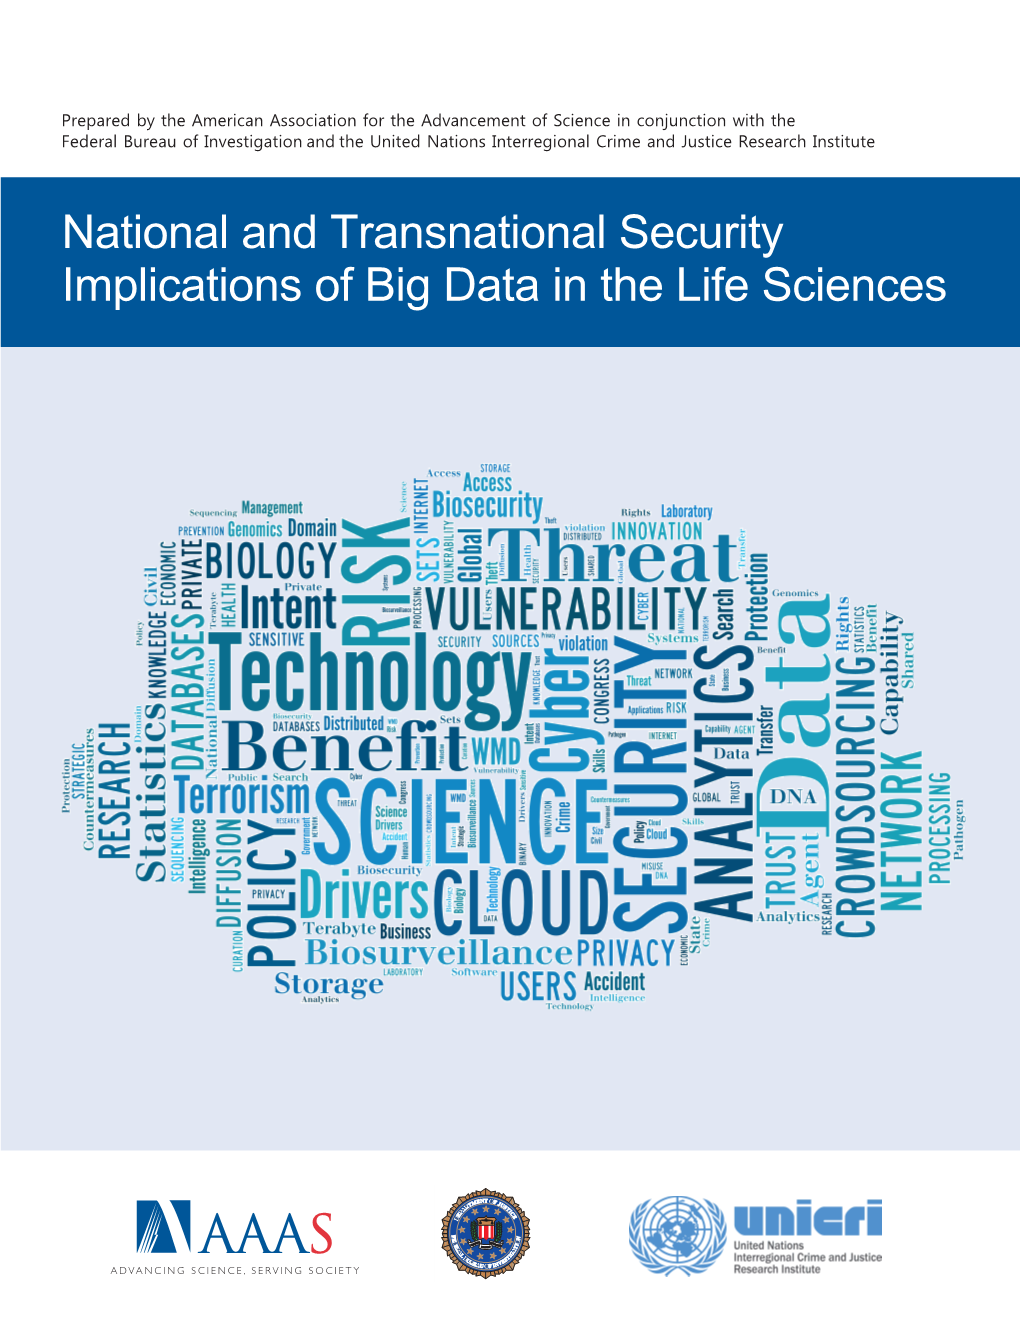 National and Transnational Security Implications of Big Data in the Life Sciences